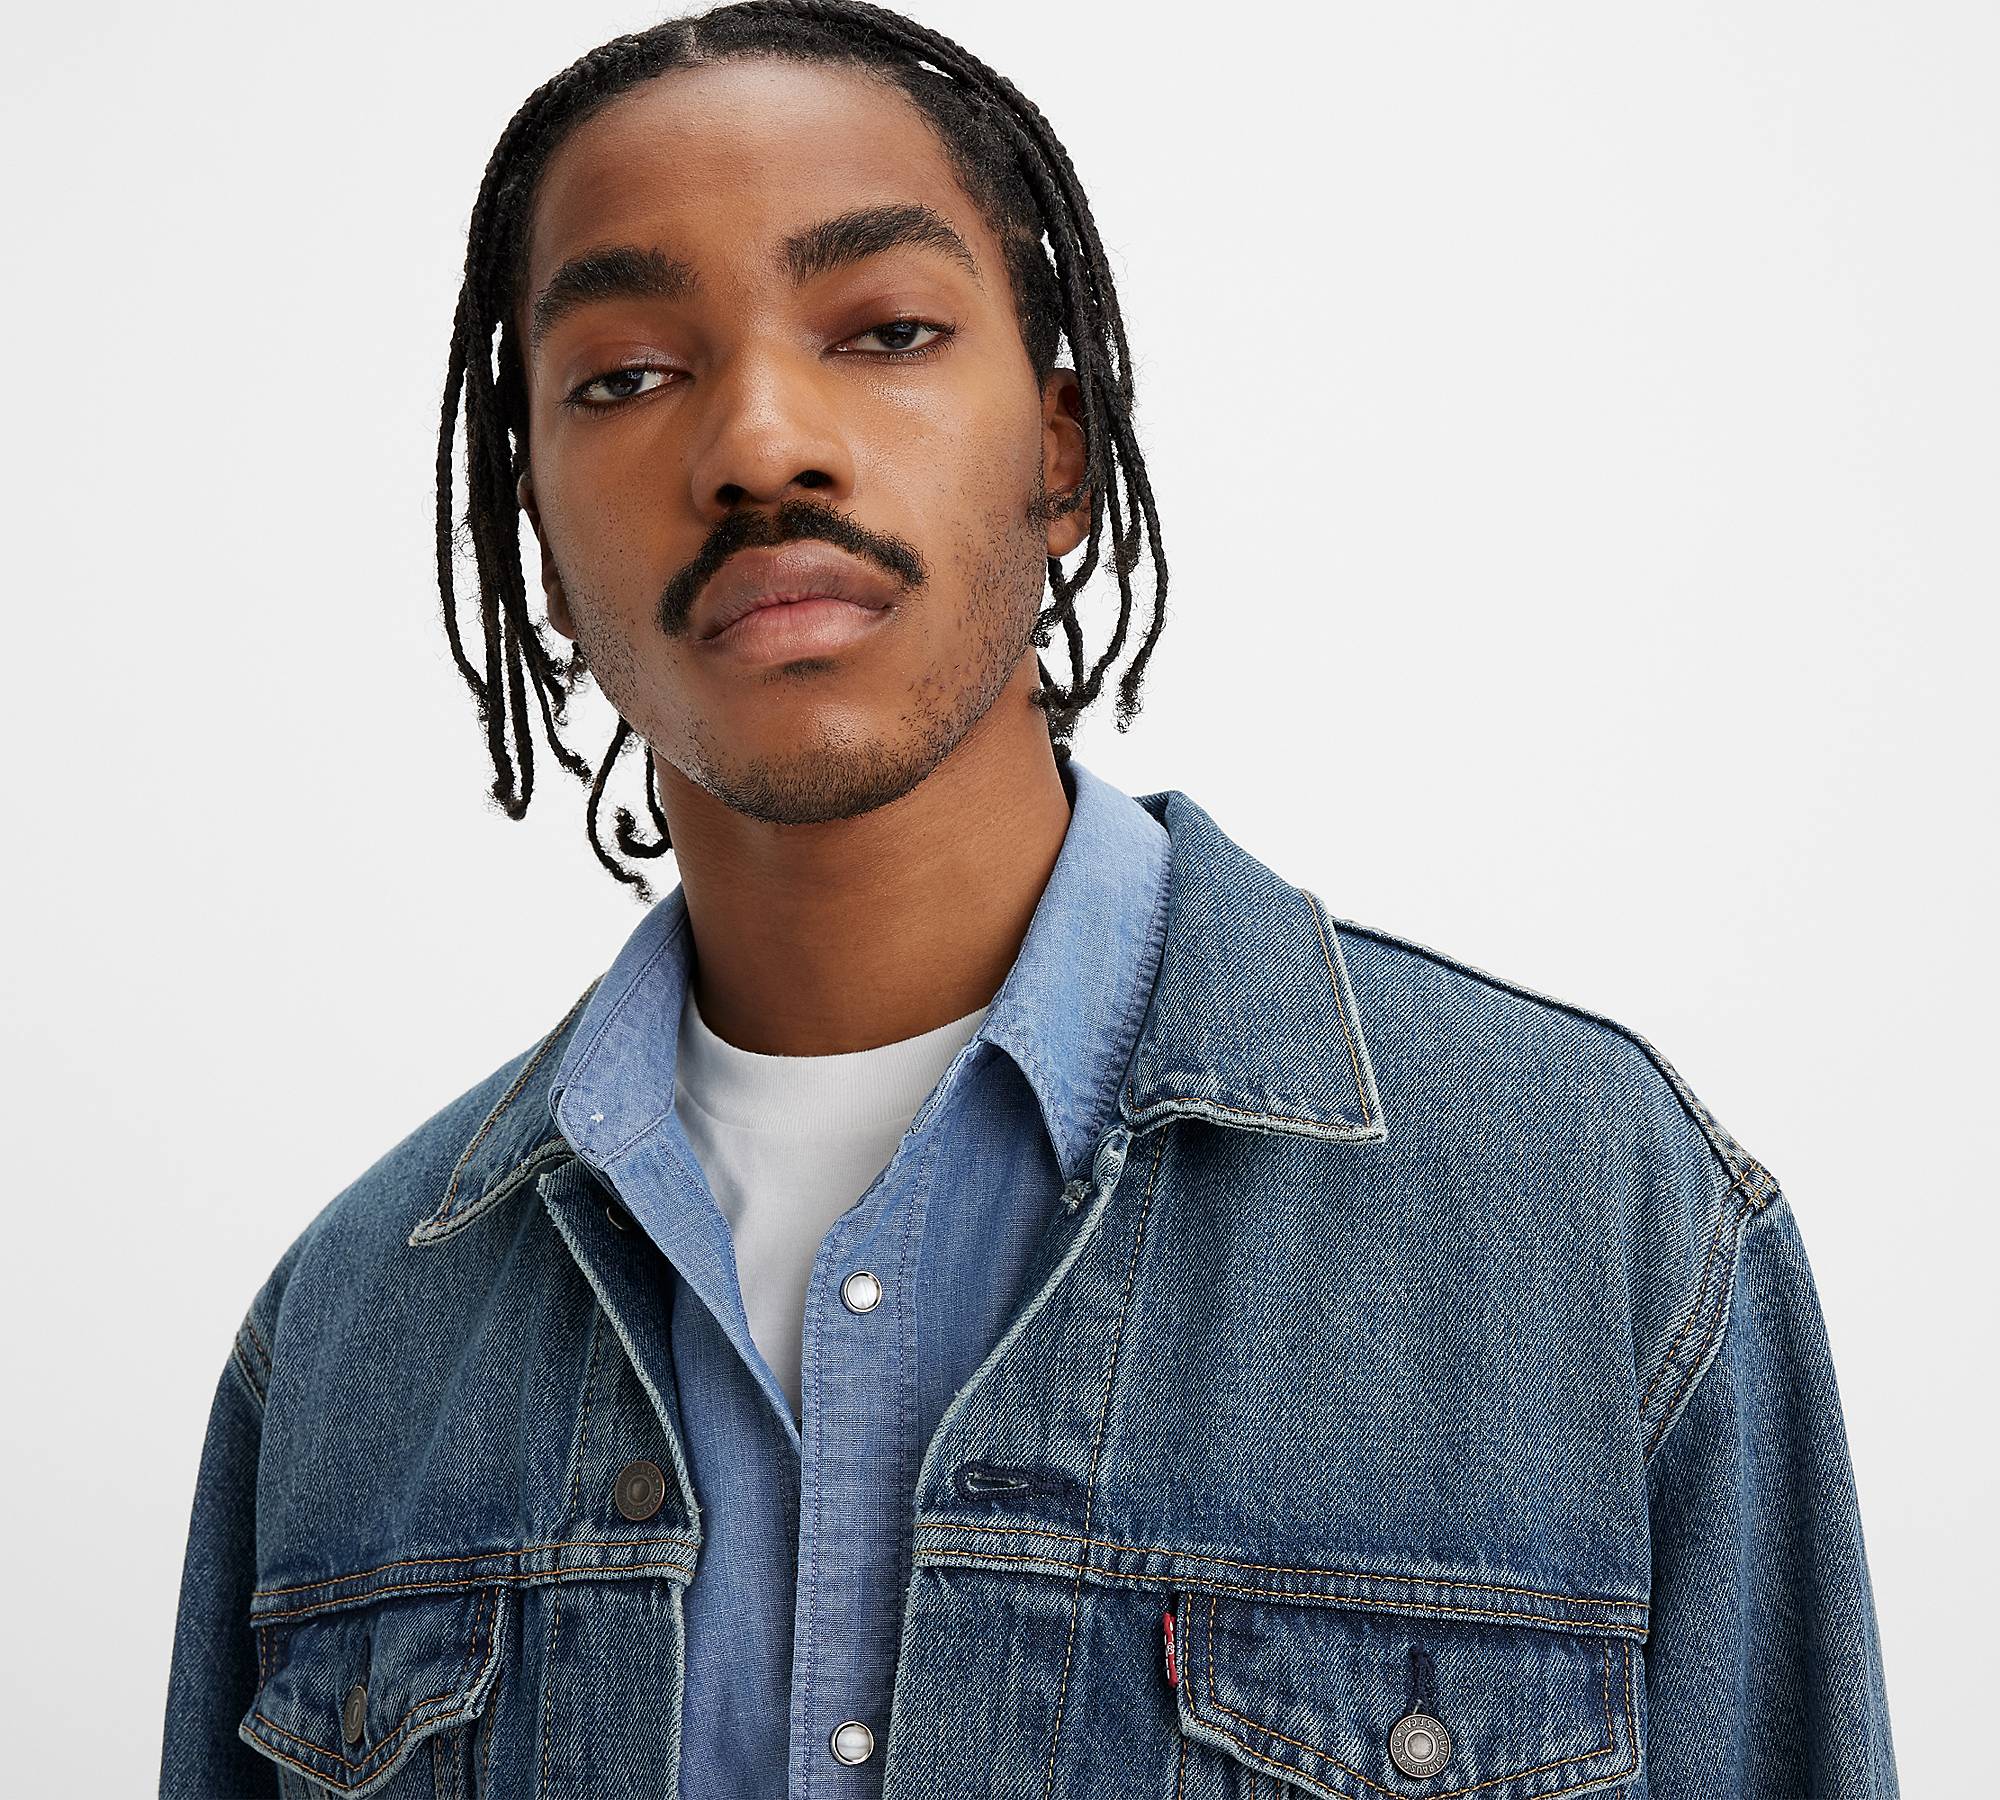 Relaxed Fit Trucker Jacket - Blue | Levi's® GB